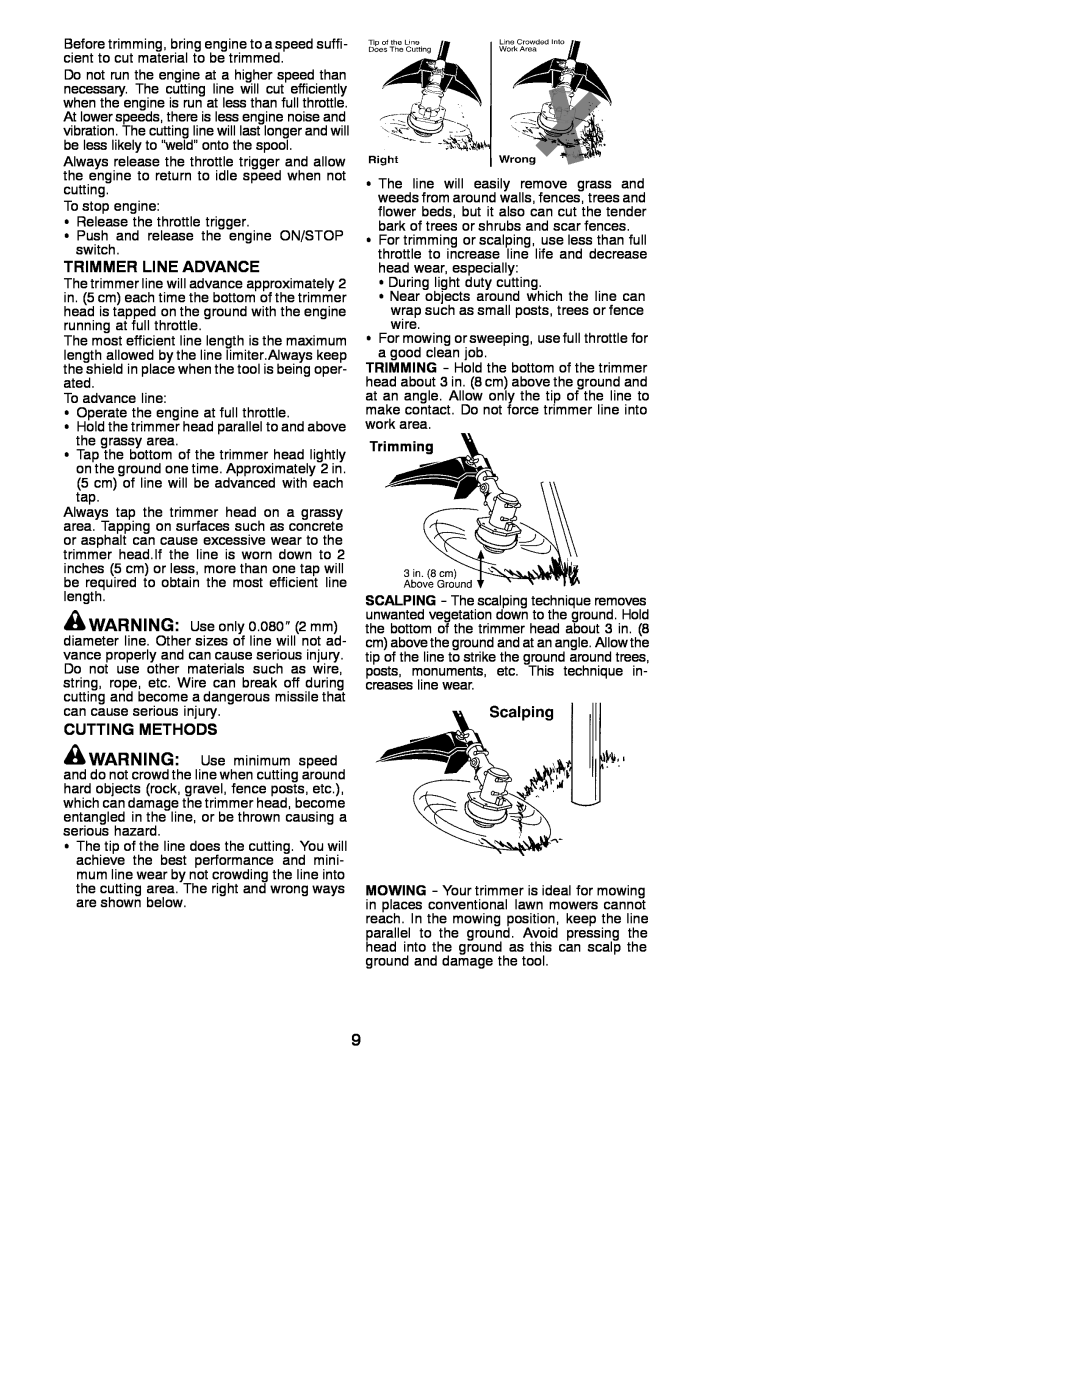 Weed Eater 530086916 instruction manual Trimmer Line Advance, Cutting Methods, Trimming 